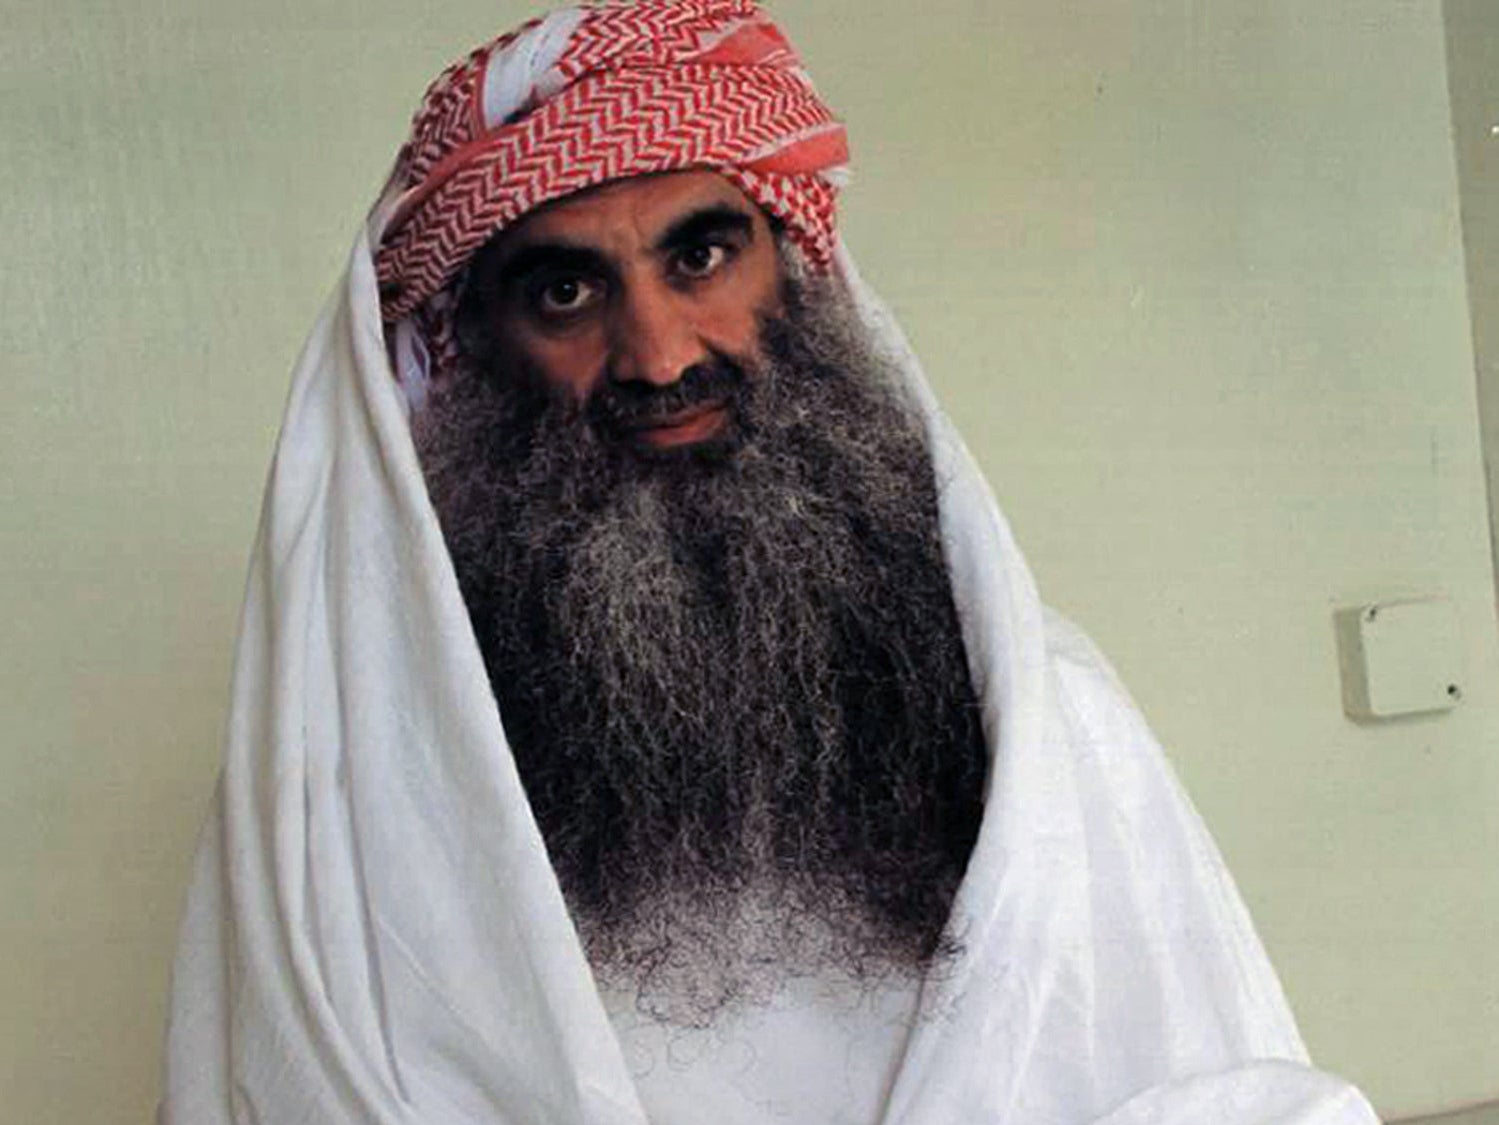 Khalid Sheikh Mohammed awaits trial with four al-Qaeda co-defendants for the attacks of 9/11